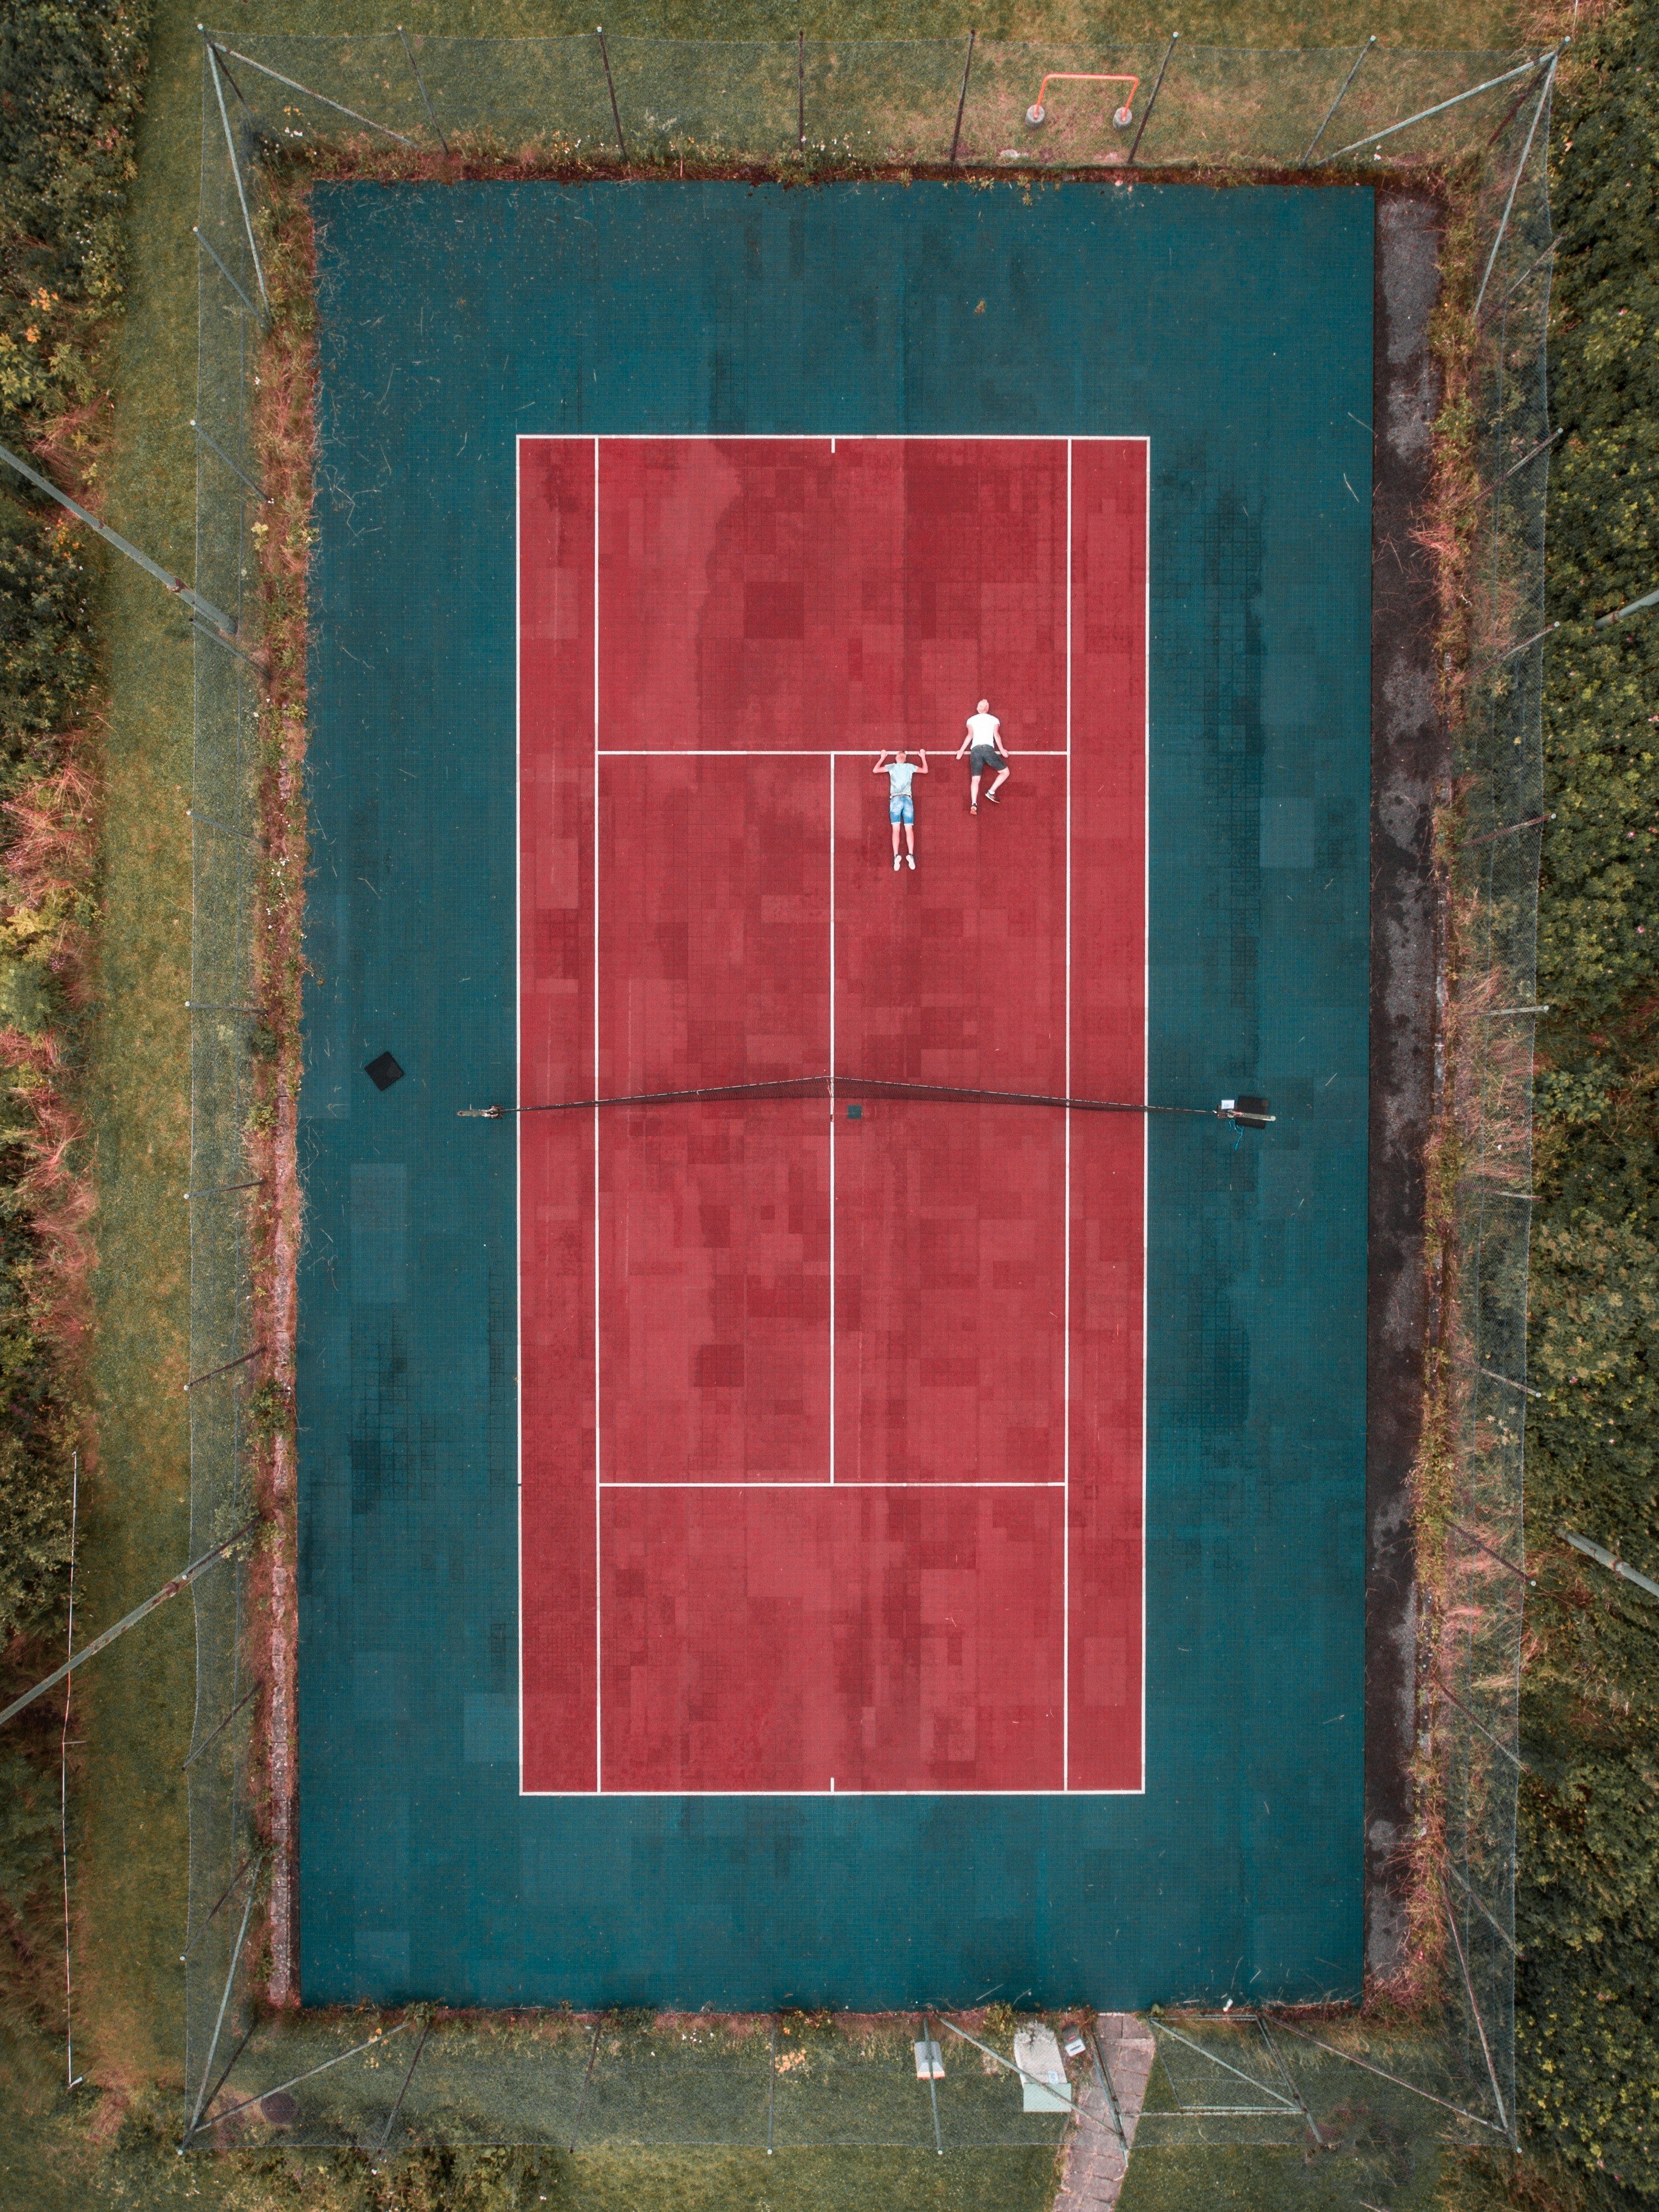 Wallpaper / a drone looking down at an outdoor tennis